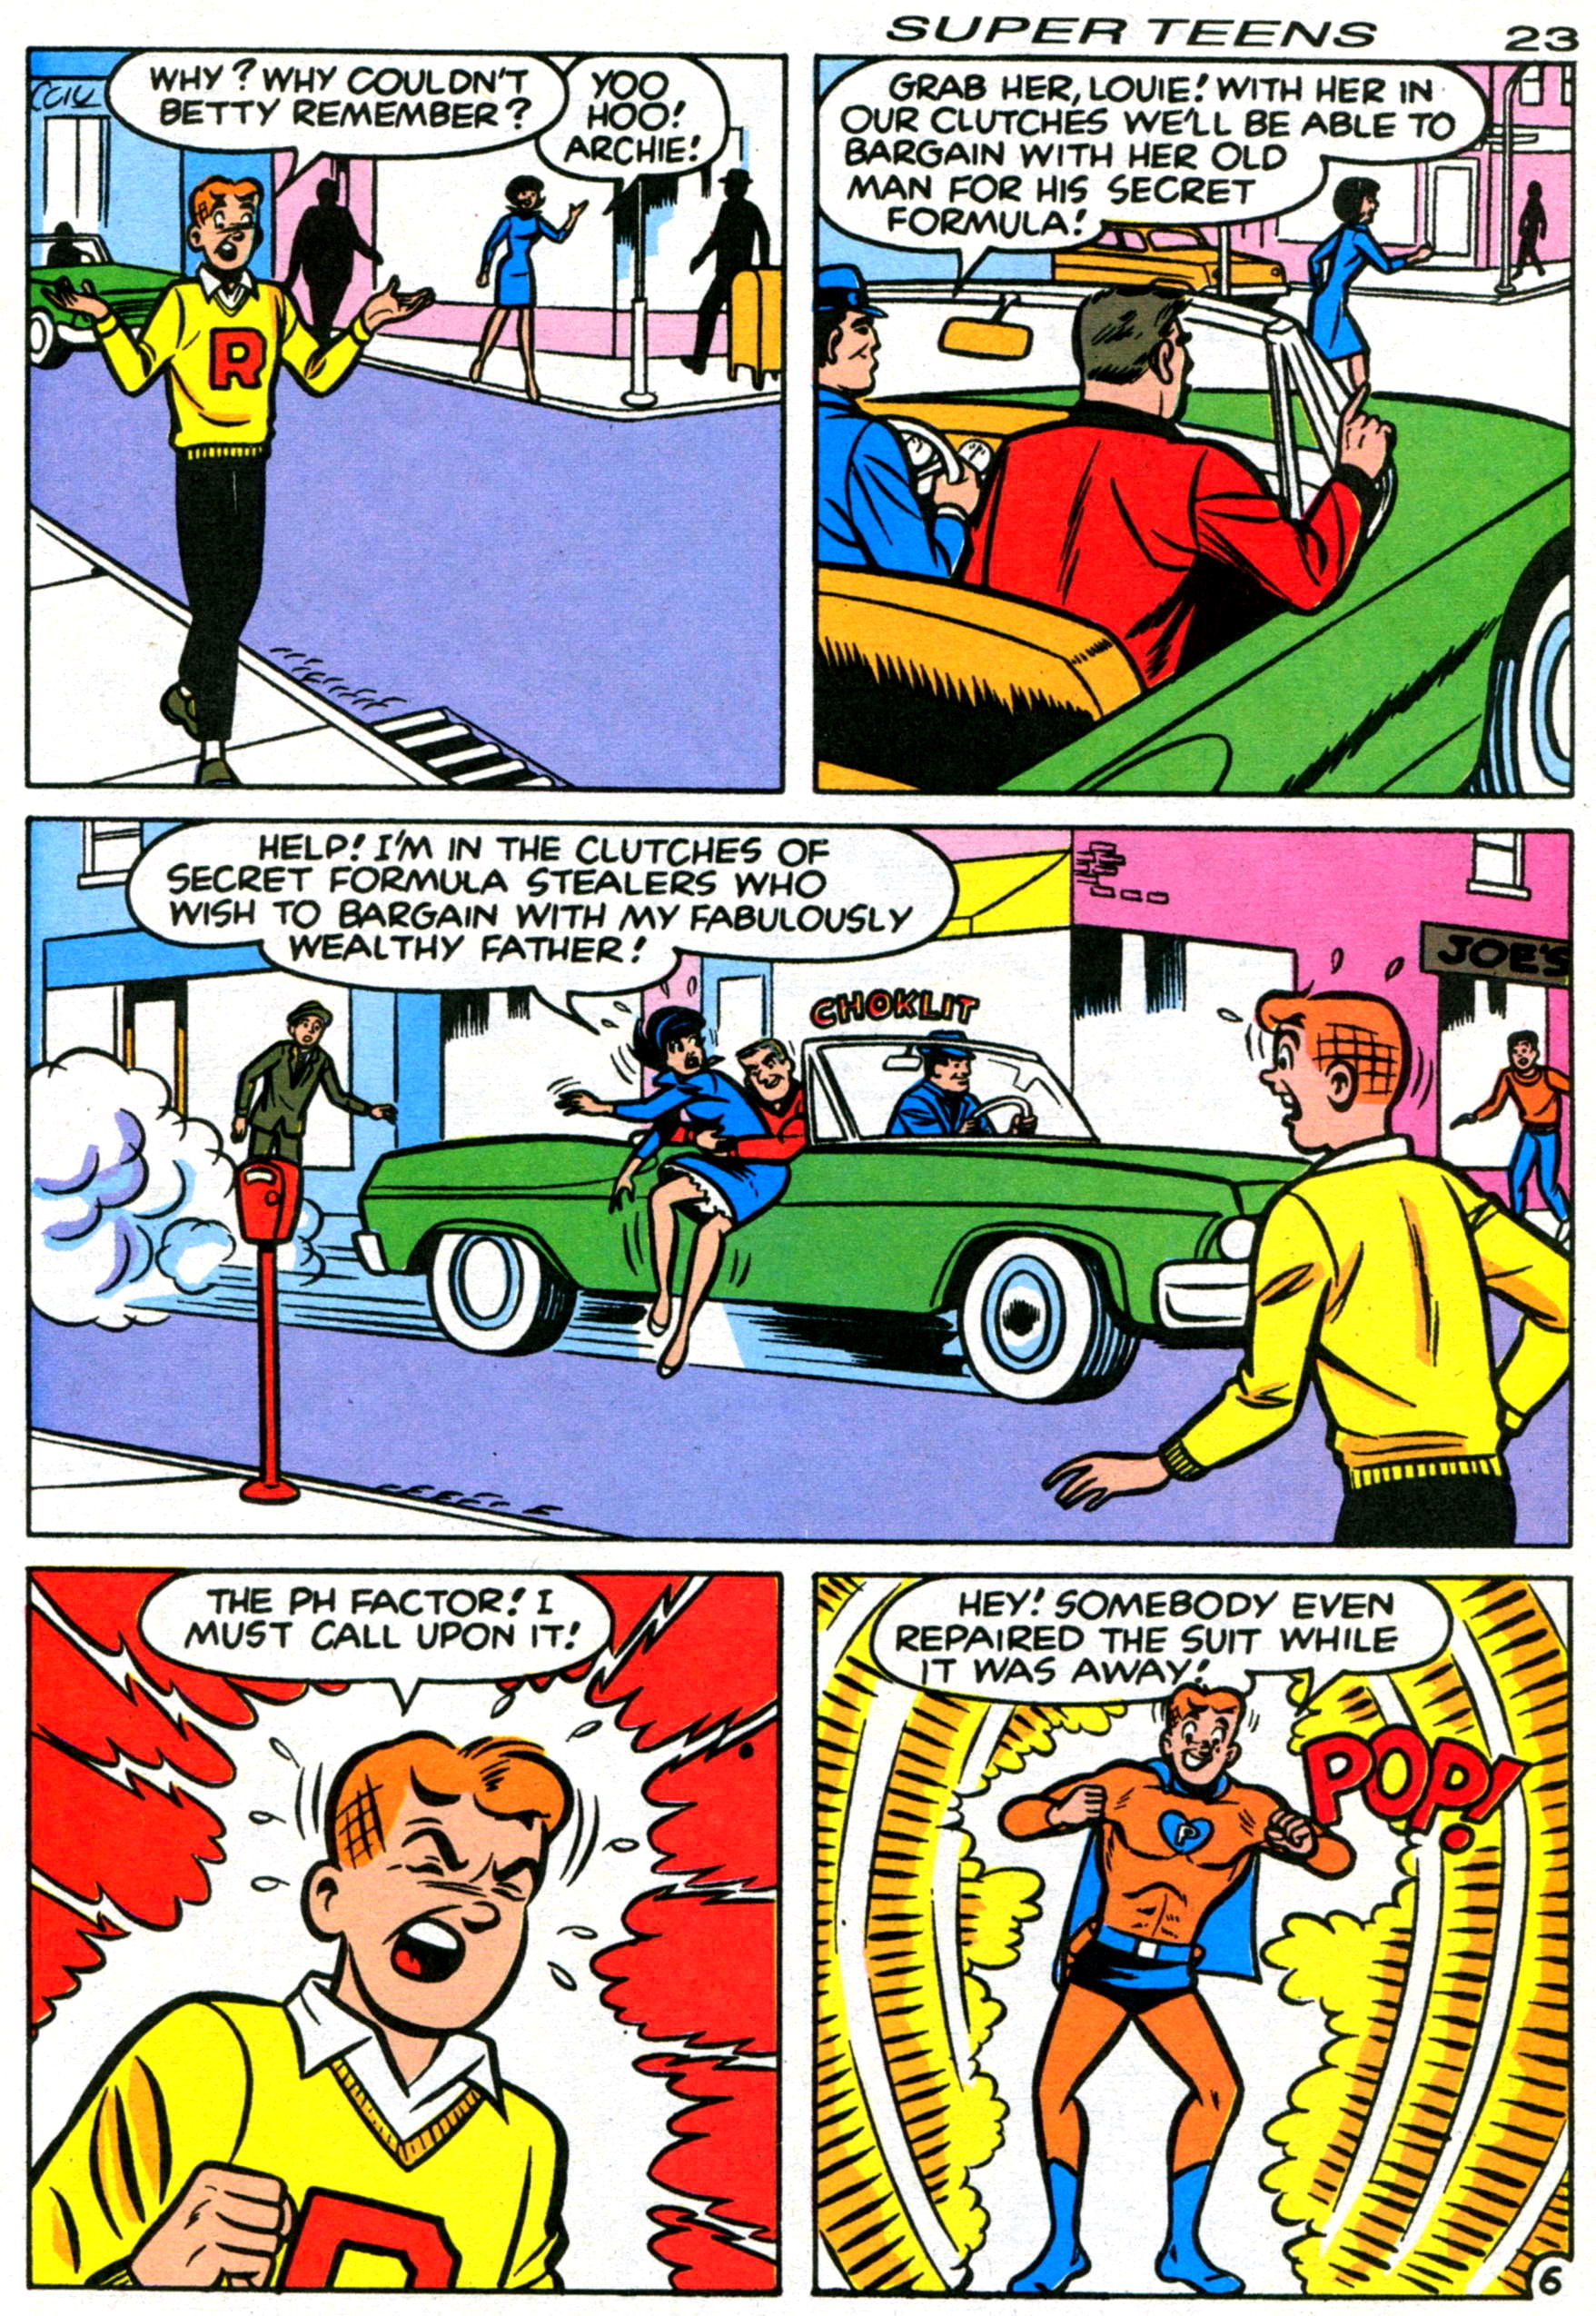 Read online Archie's Super Teens comic -  Issue #1 - 25